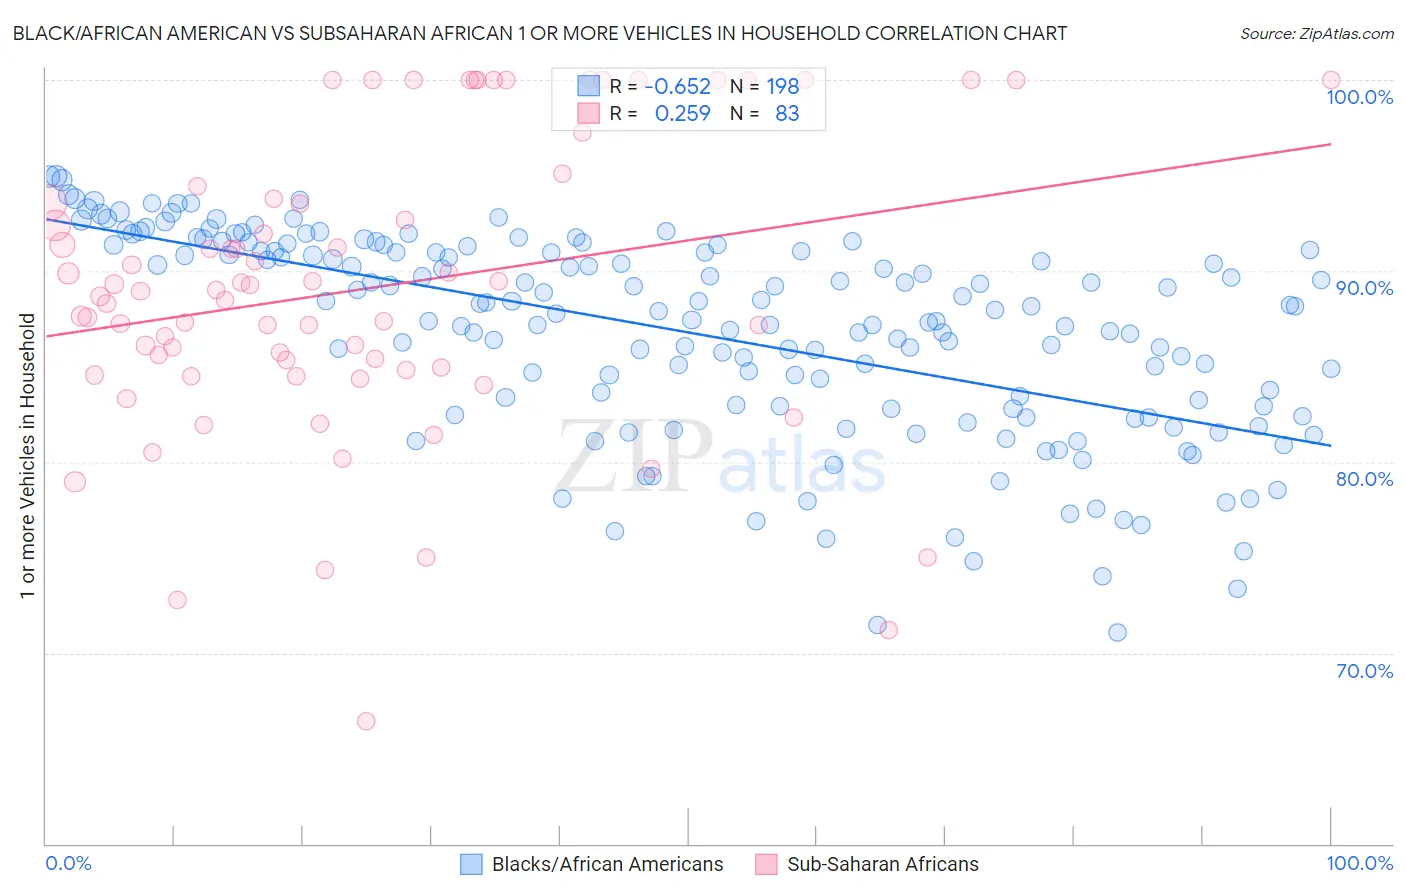 Black/African American vs Subsaharan African 1 or more Vehicles in Household